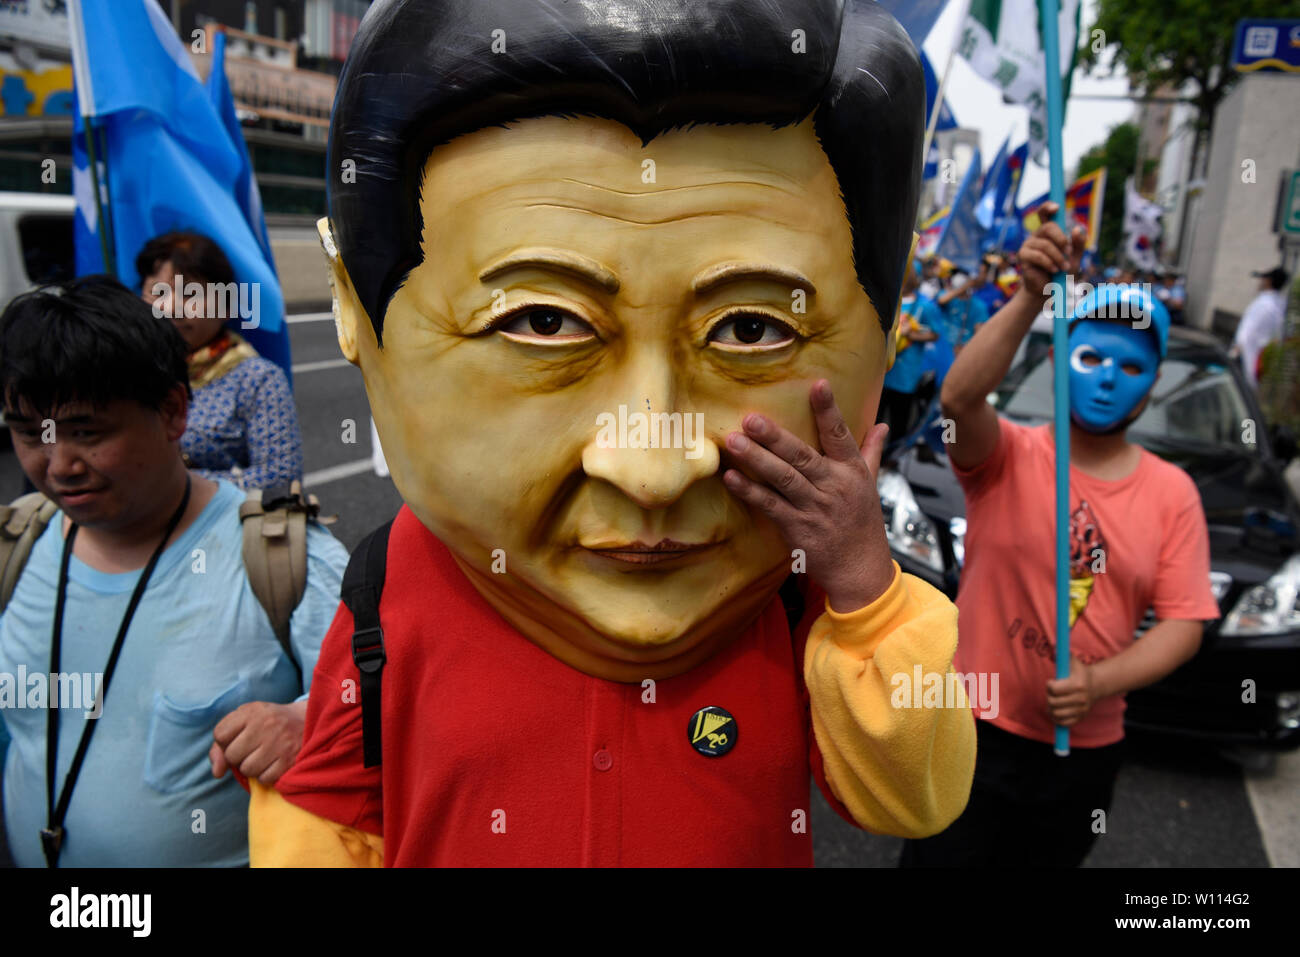 Osaka, Japan. 29th Jun 2019. A protestor wears a mask of Chinese President Xi Jinping at a demonstration during the G20 Summit in Osaka, Japan. Credit: Ben Weller/AFLO/Alamy Live News Stock Photo